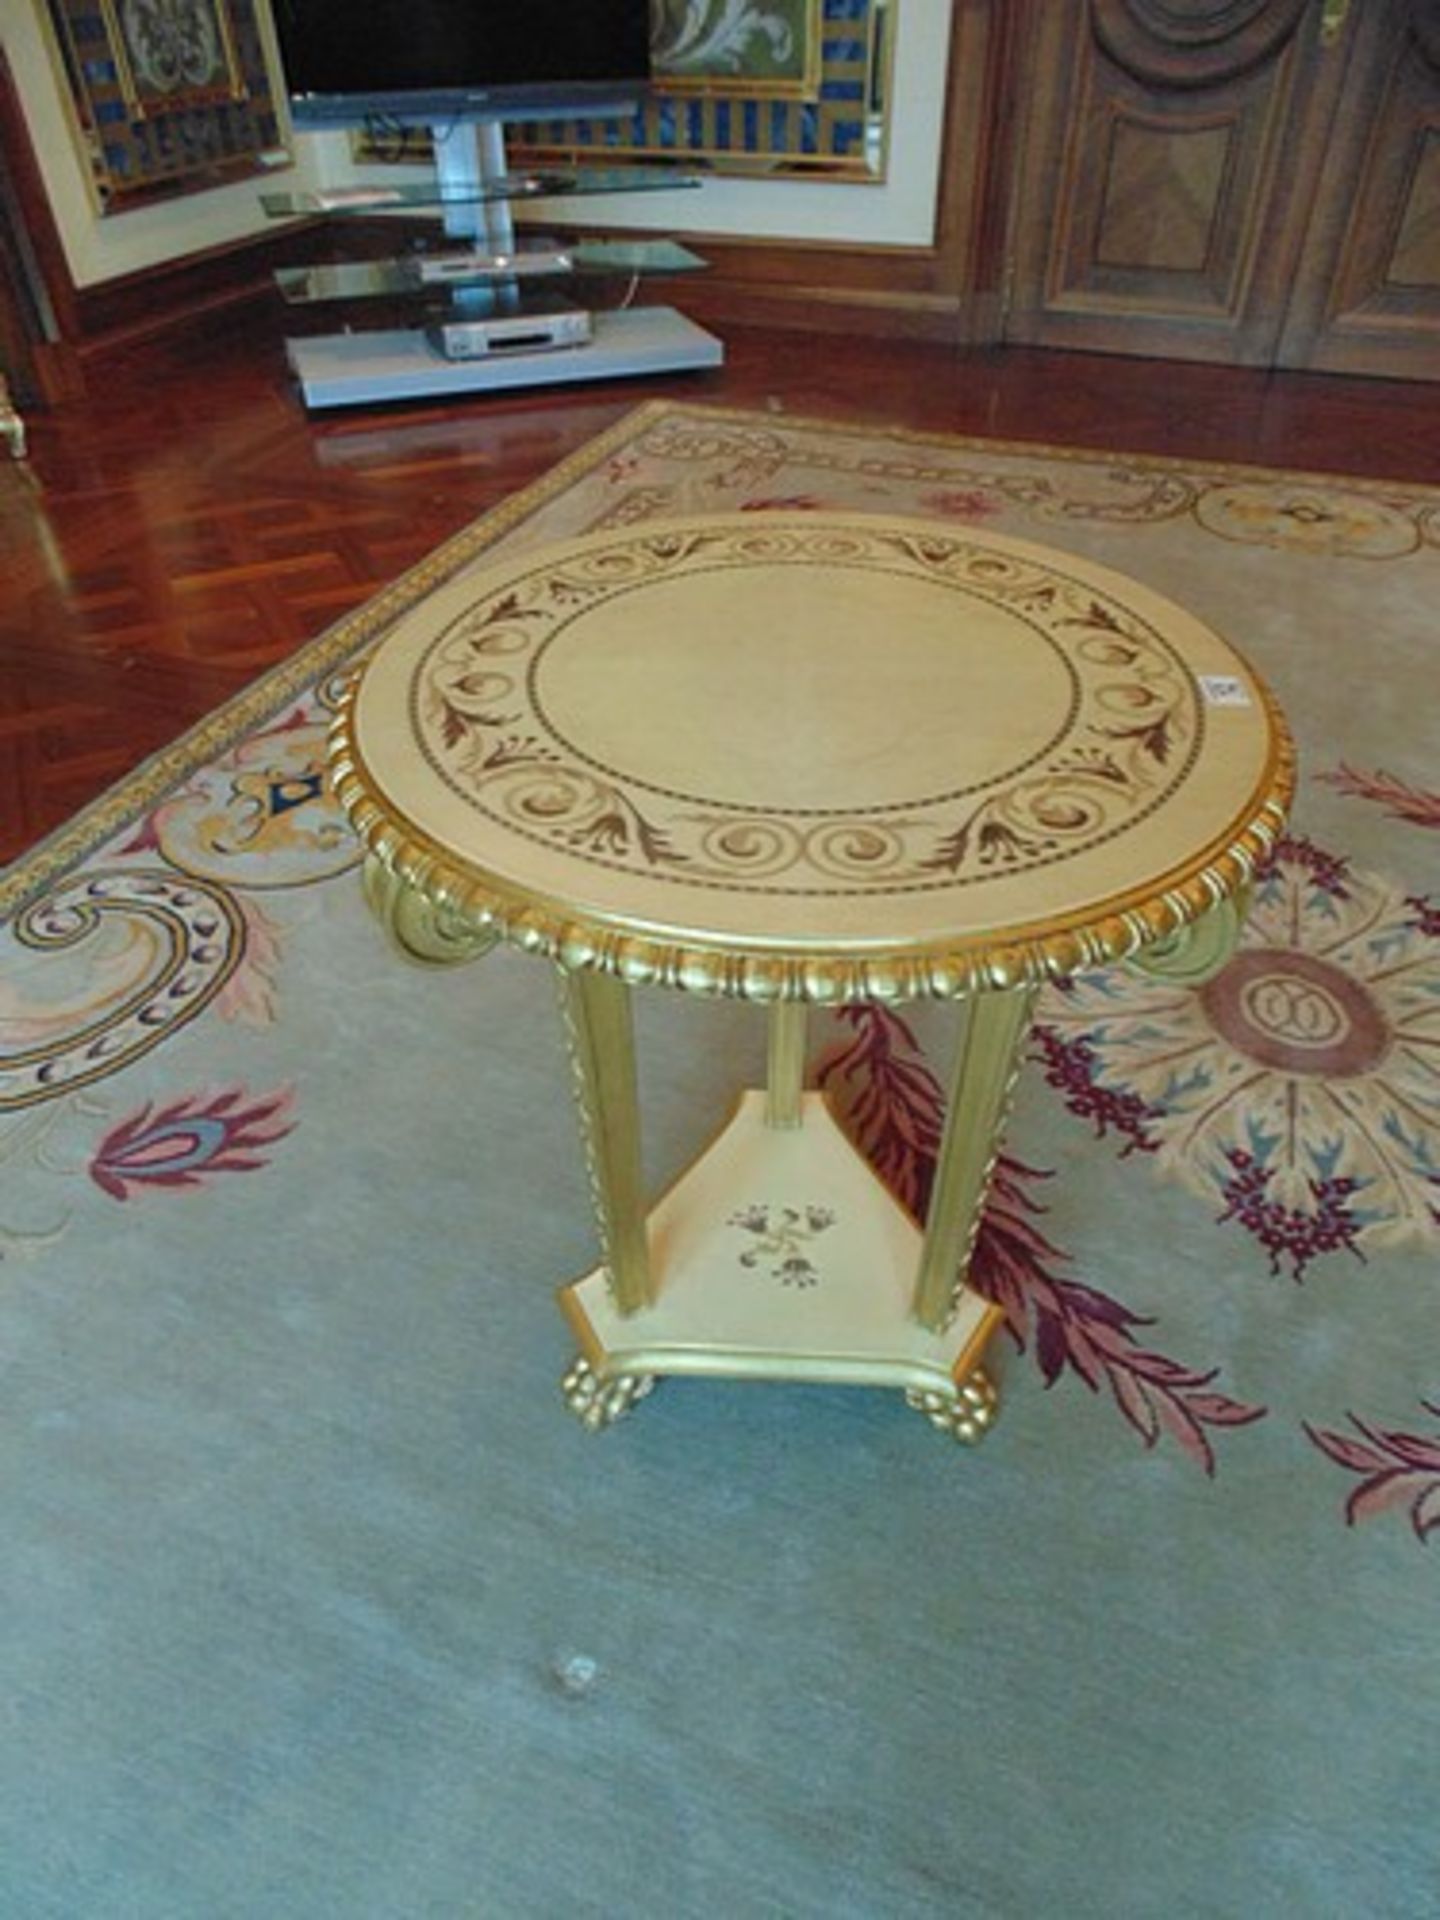 Continental parcel wood centre table 620mm diameter the top with floral motif mounted over three